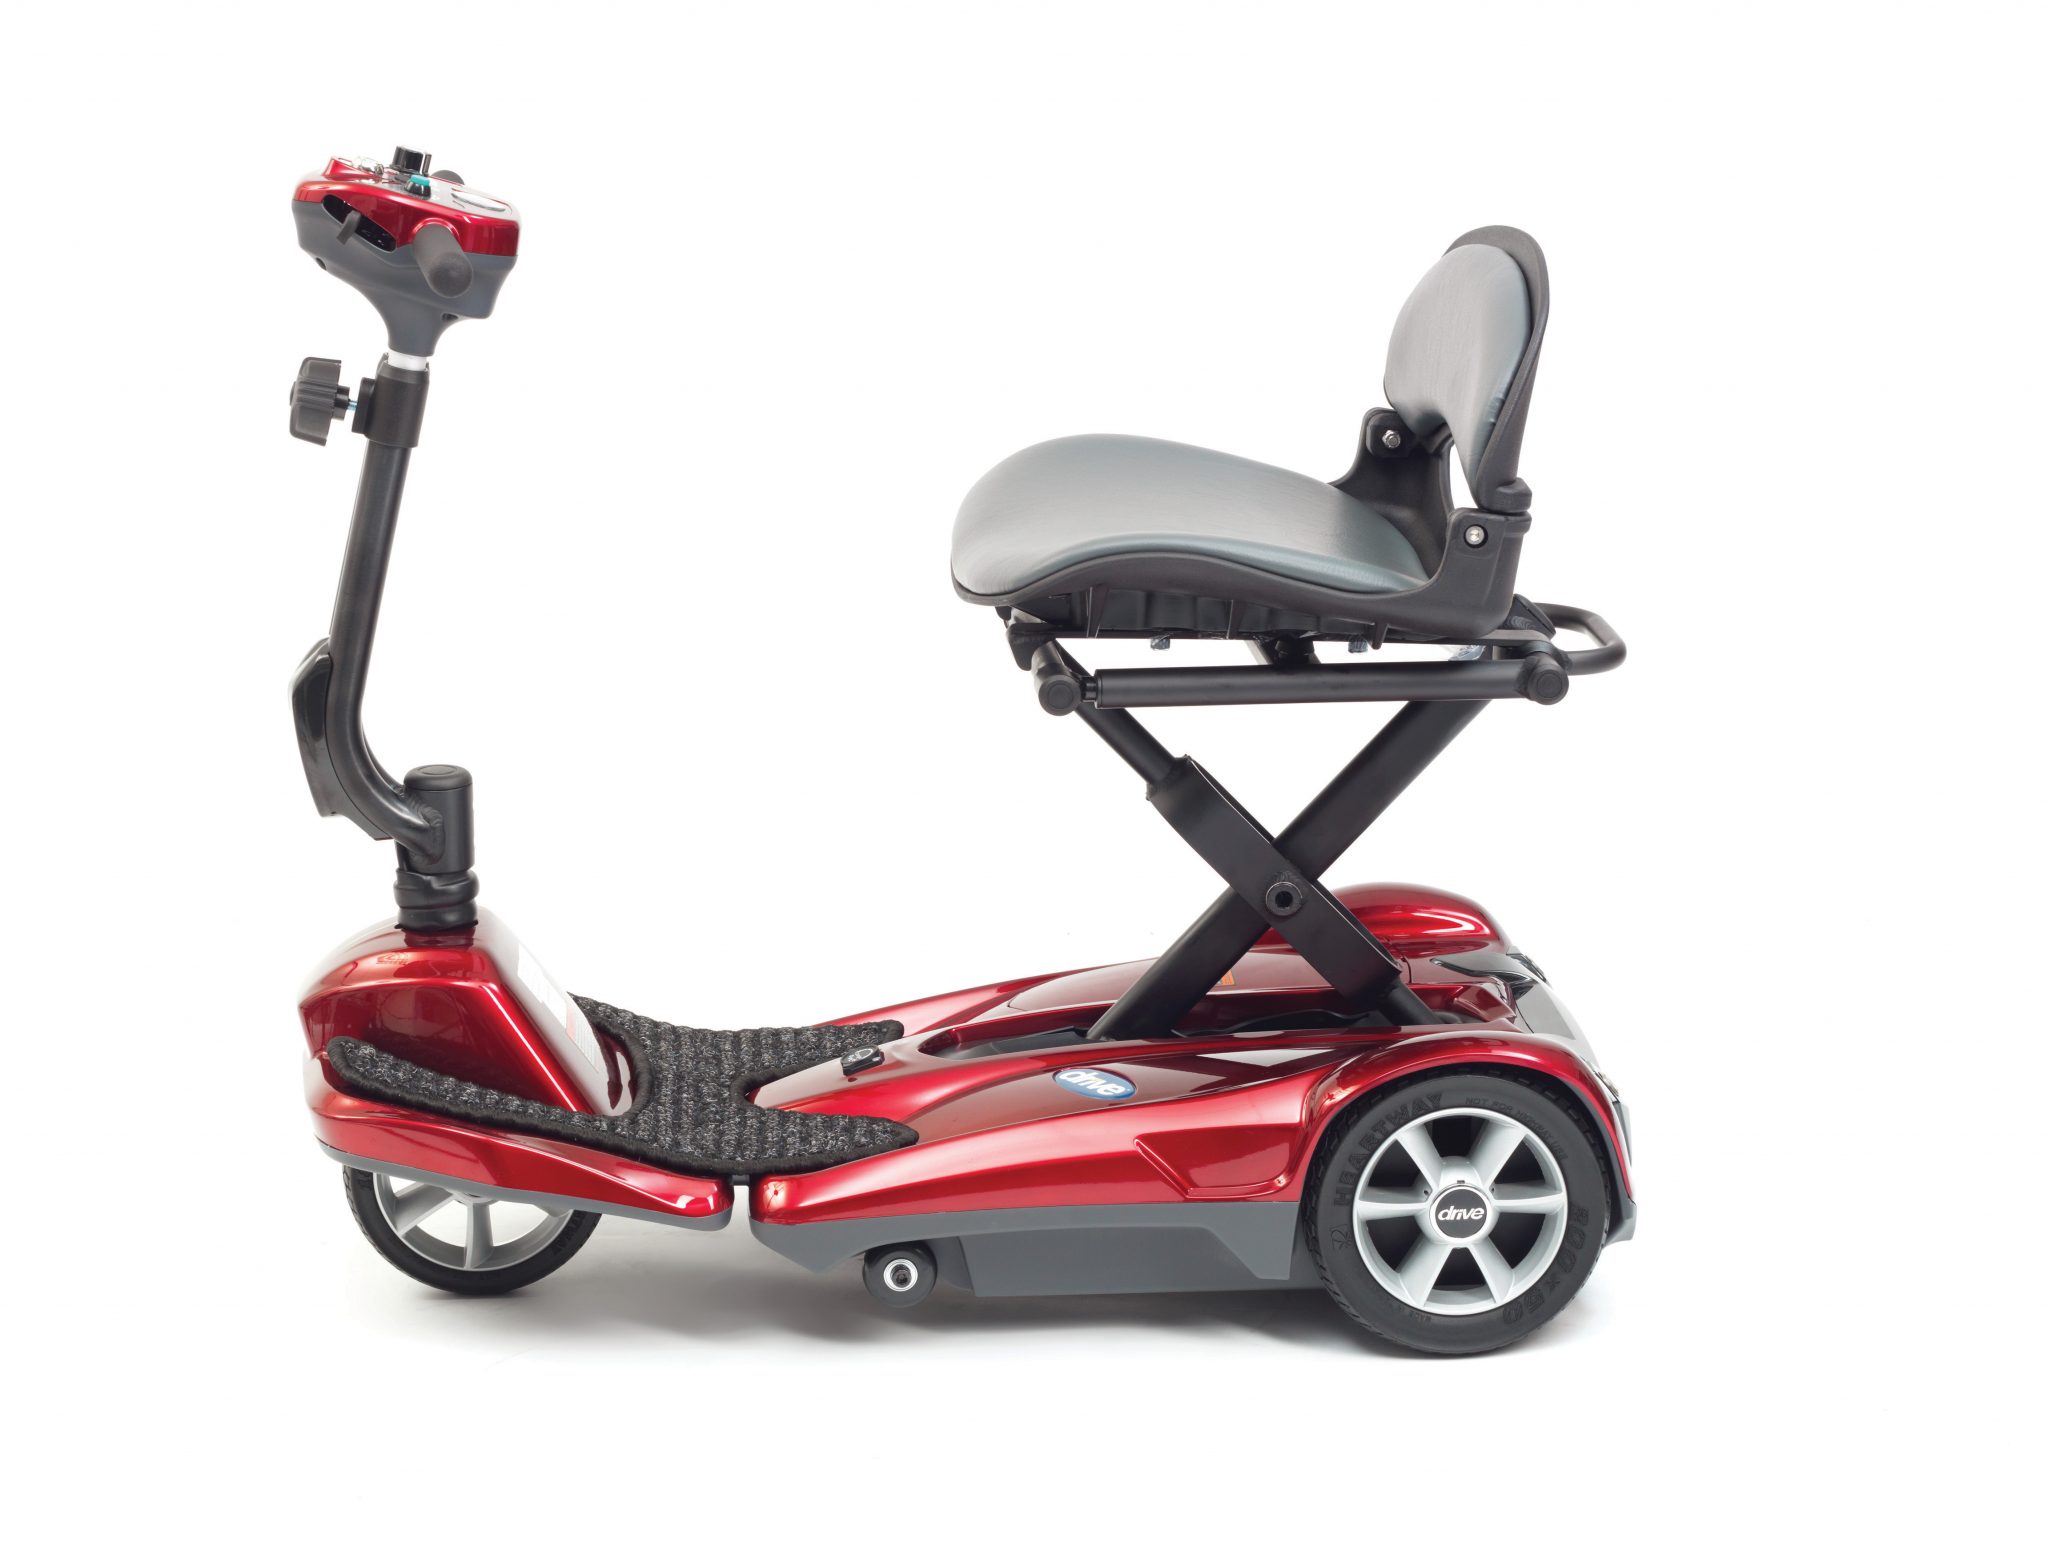 Folding Mobility Scooter